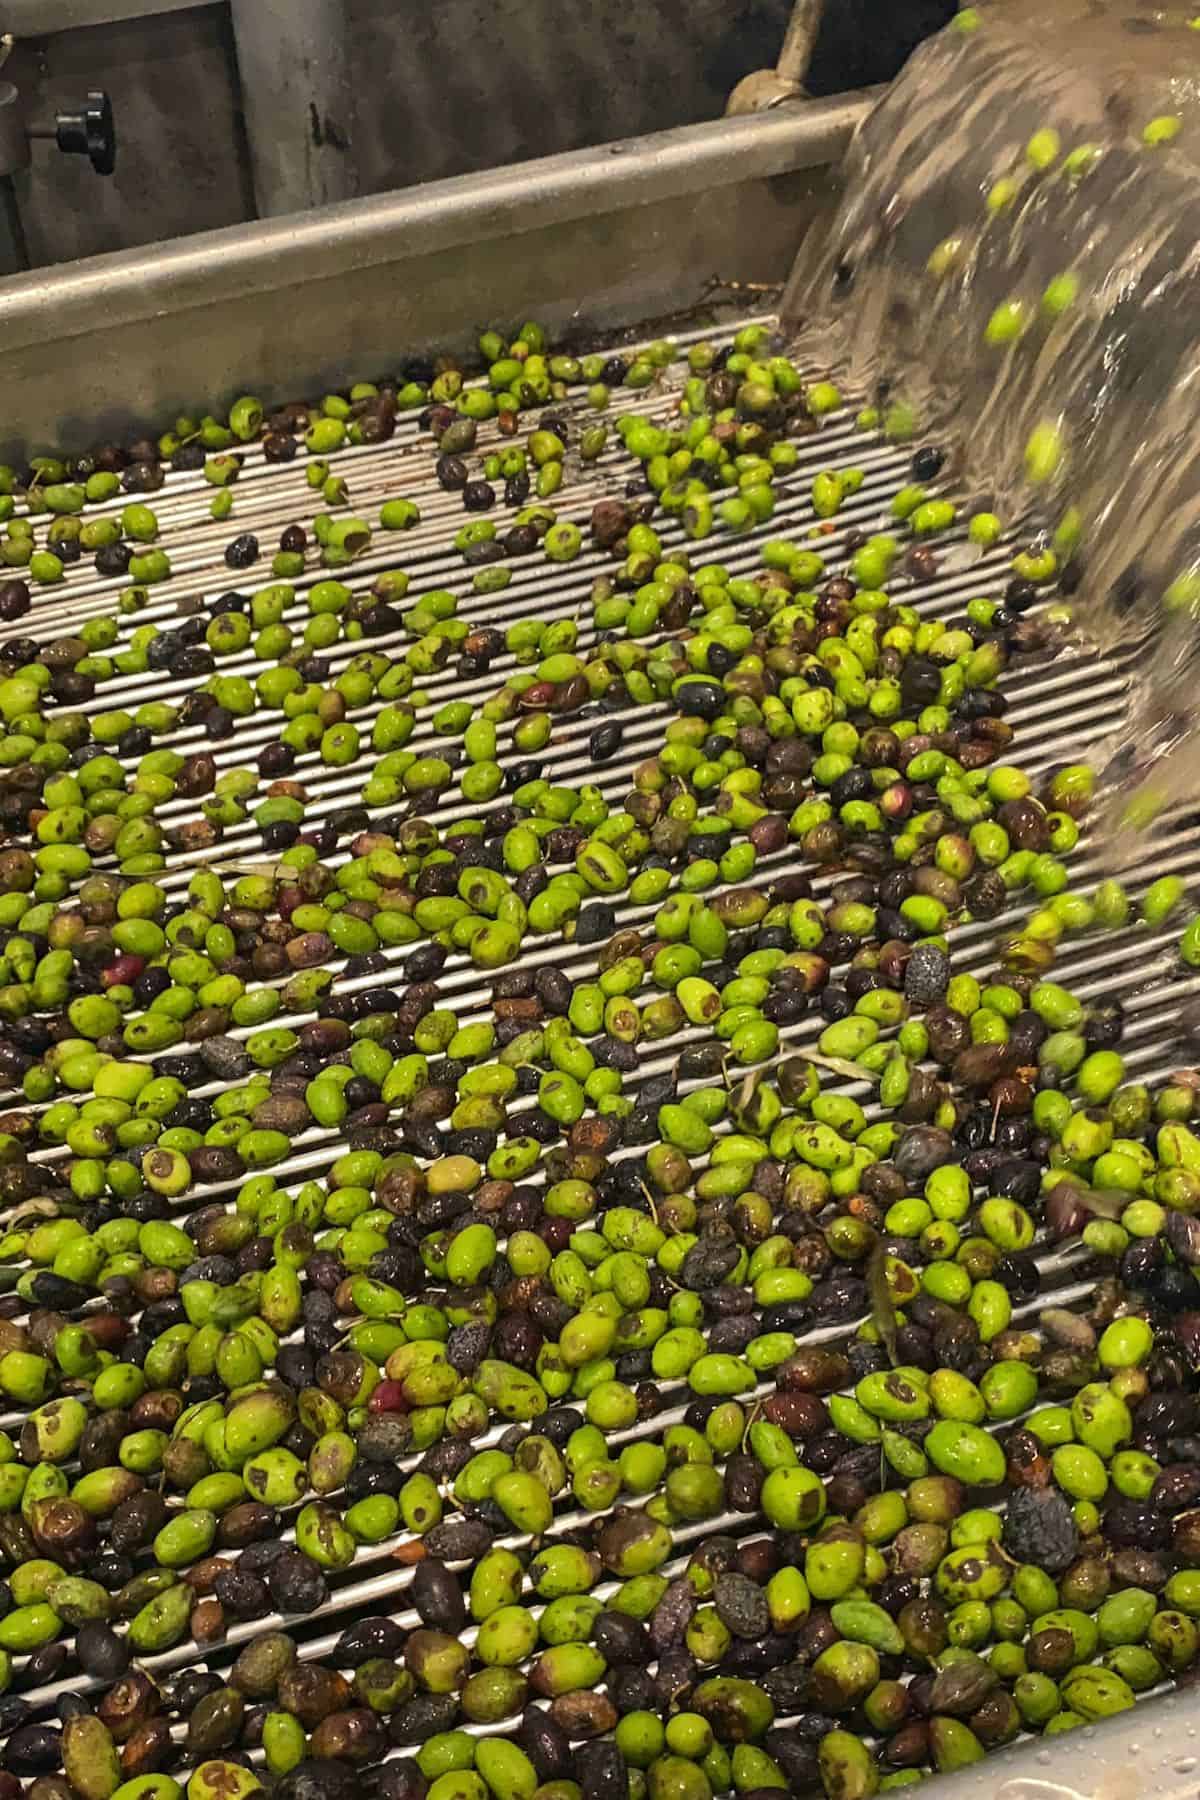 Cleaning olives